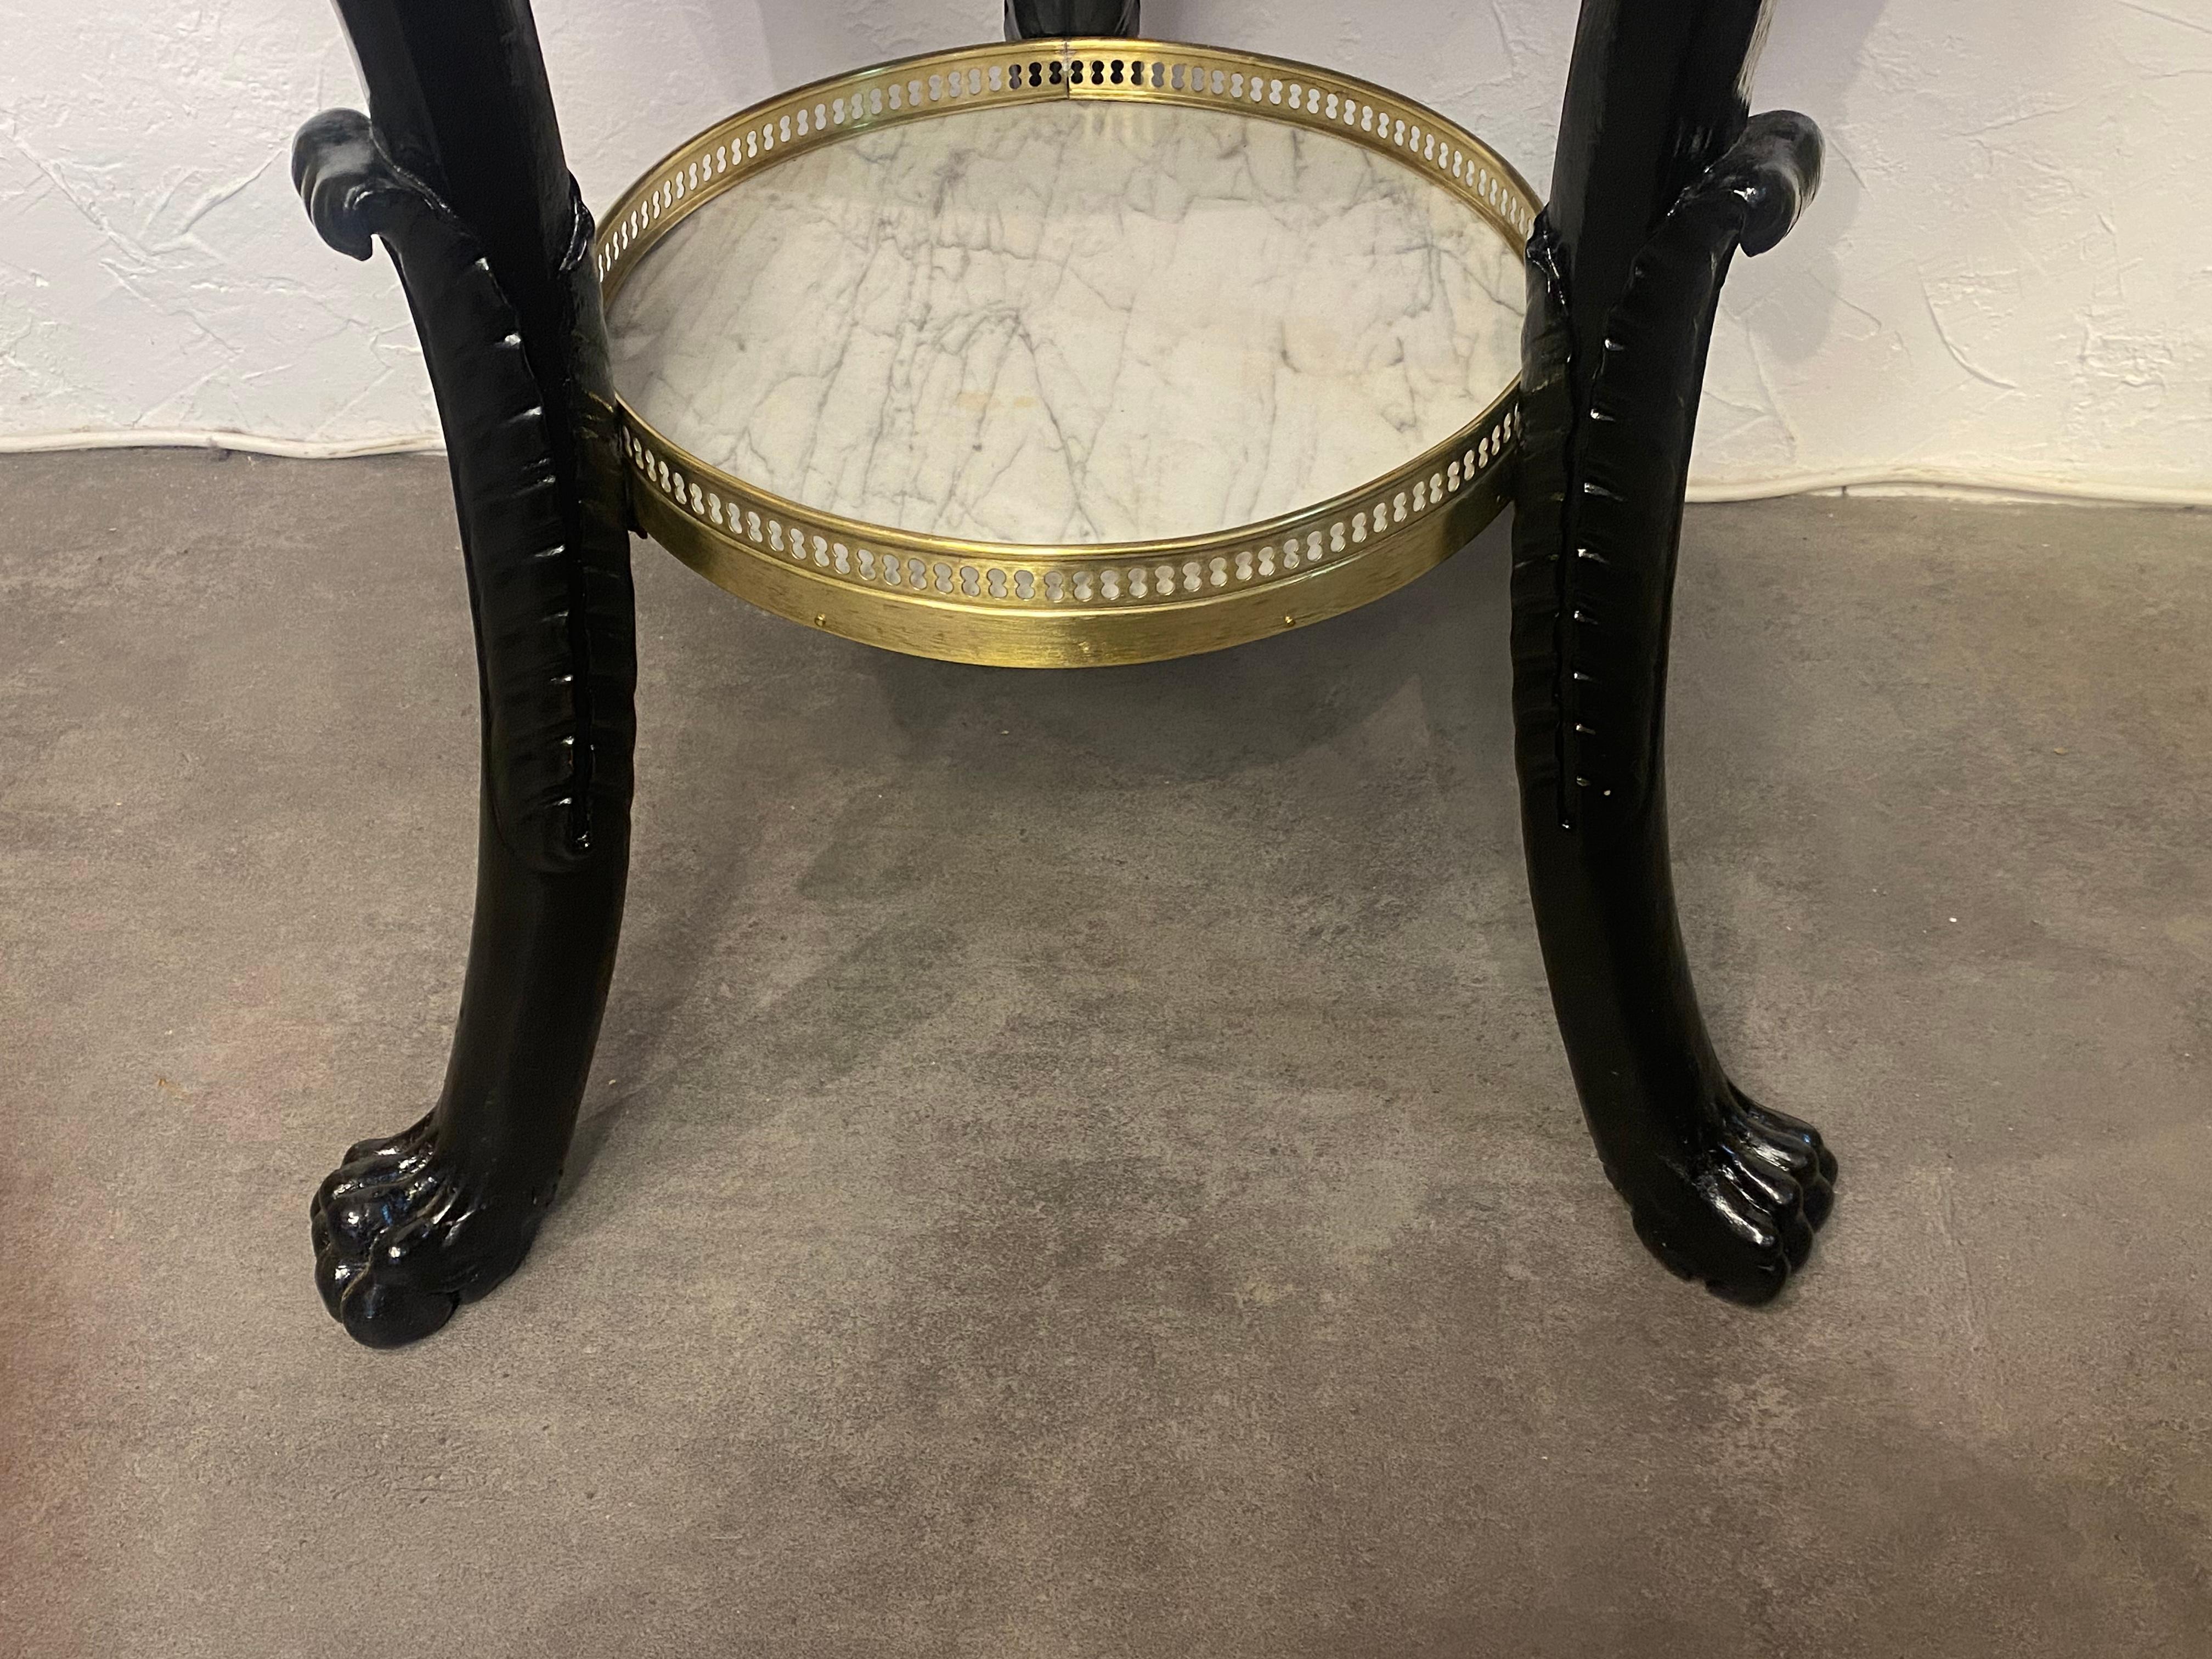 Marble Table/pedestal Table - B. Molitor - Empire Period - France - 18th Century For Sale